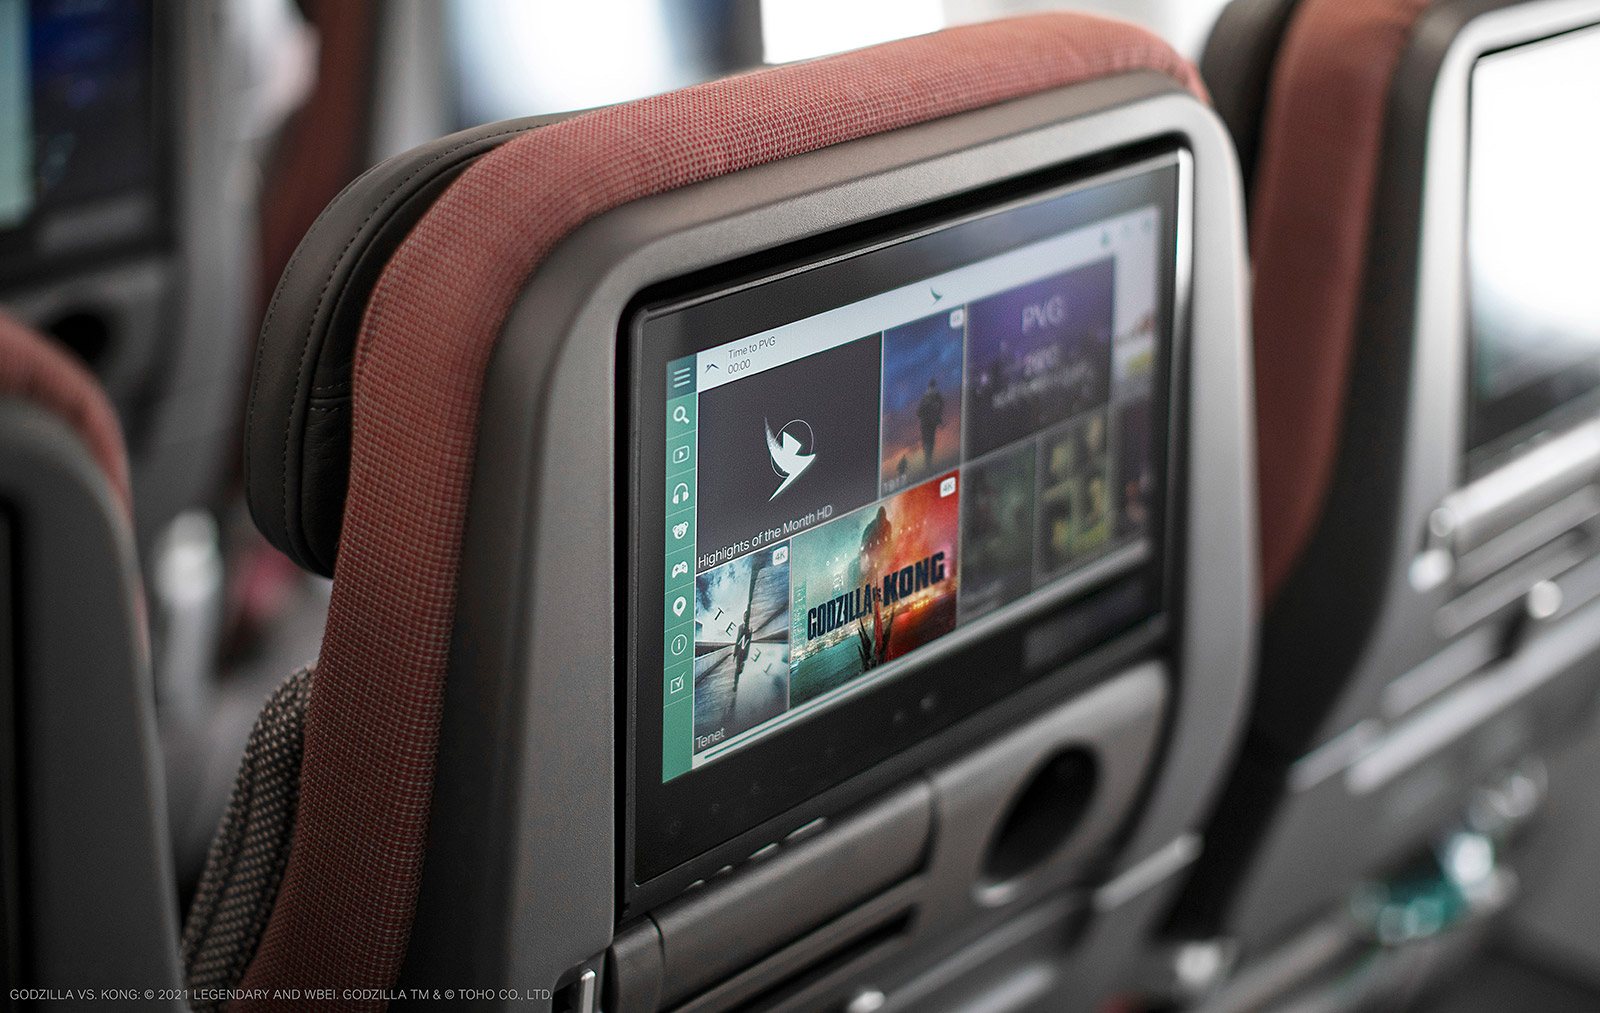 Cathay Pacific’s A321neos are the first aircraft to offer a 4K Ultra HD experience throughout the aircraft